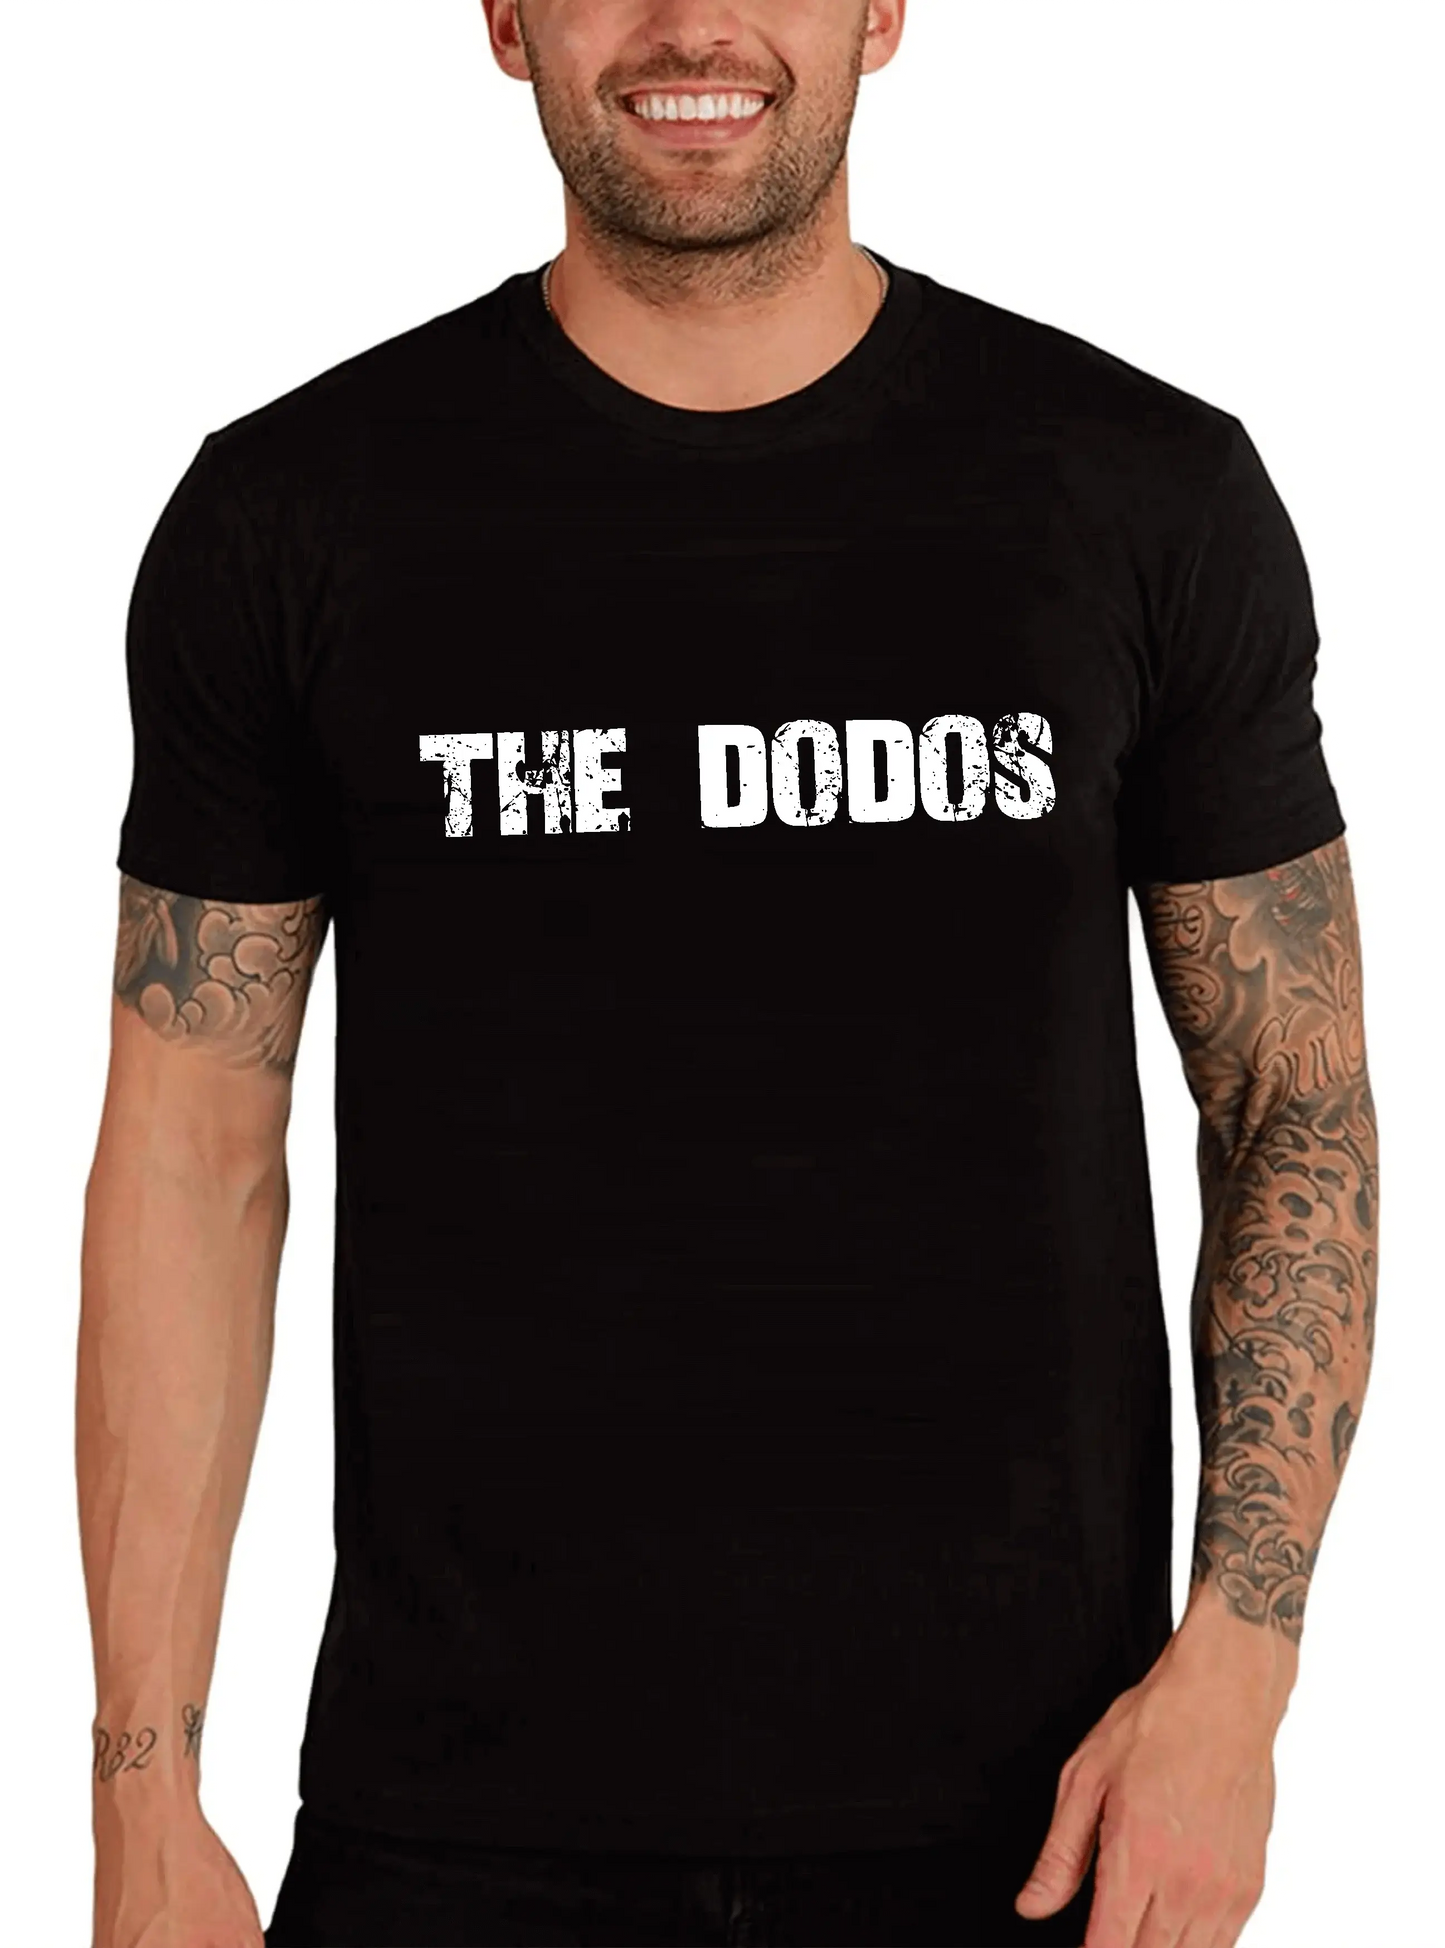 Men's Graphic T-Shirt The Dodos Eco-Friendly Limited Edition Short Sleeve Tee-Shirt Vintage Birthday Gift Novelty